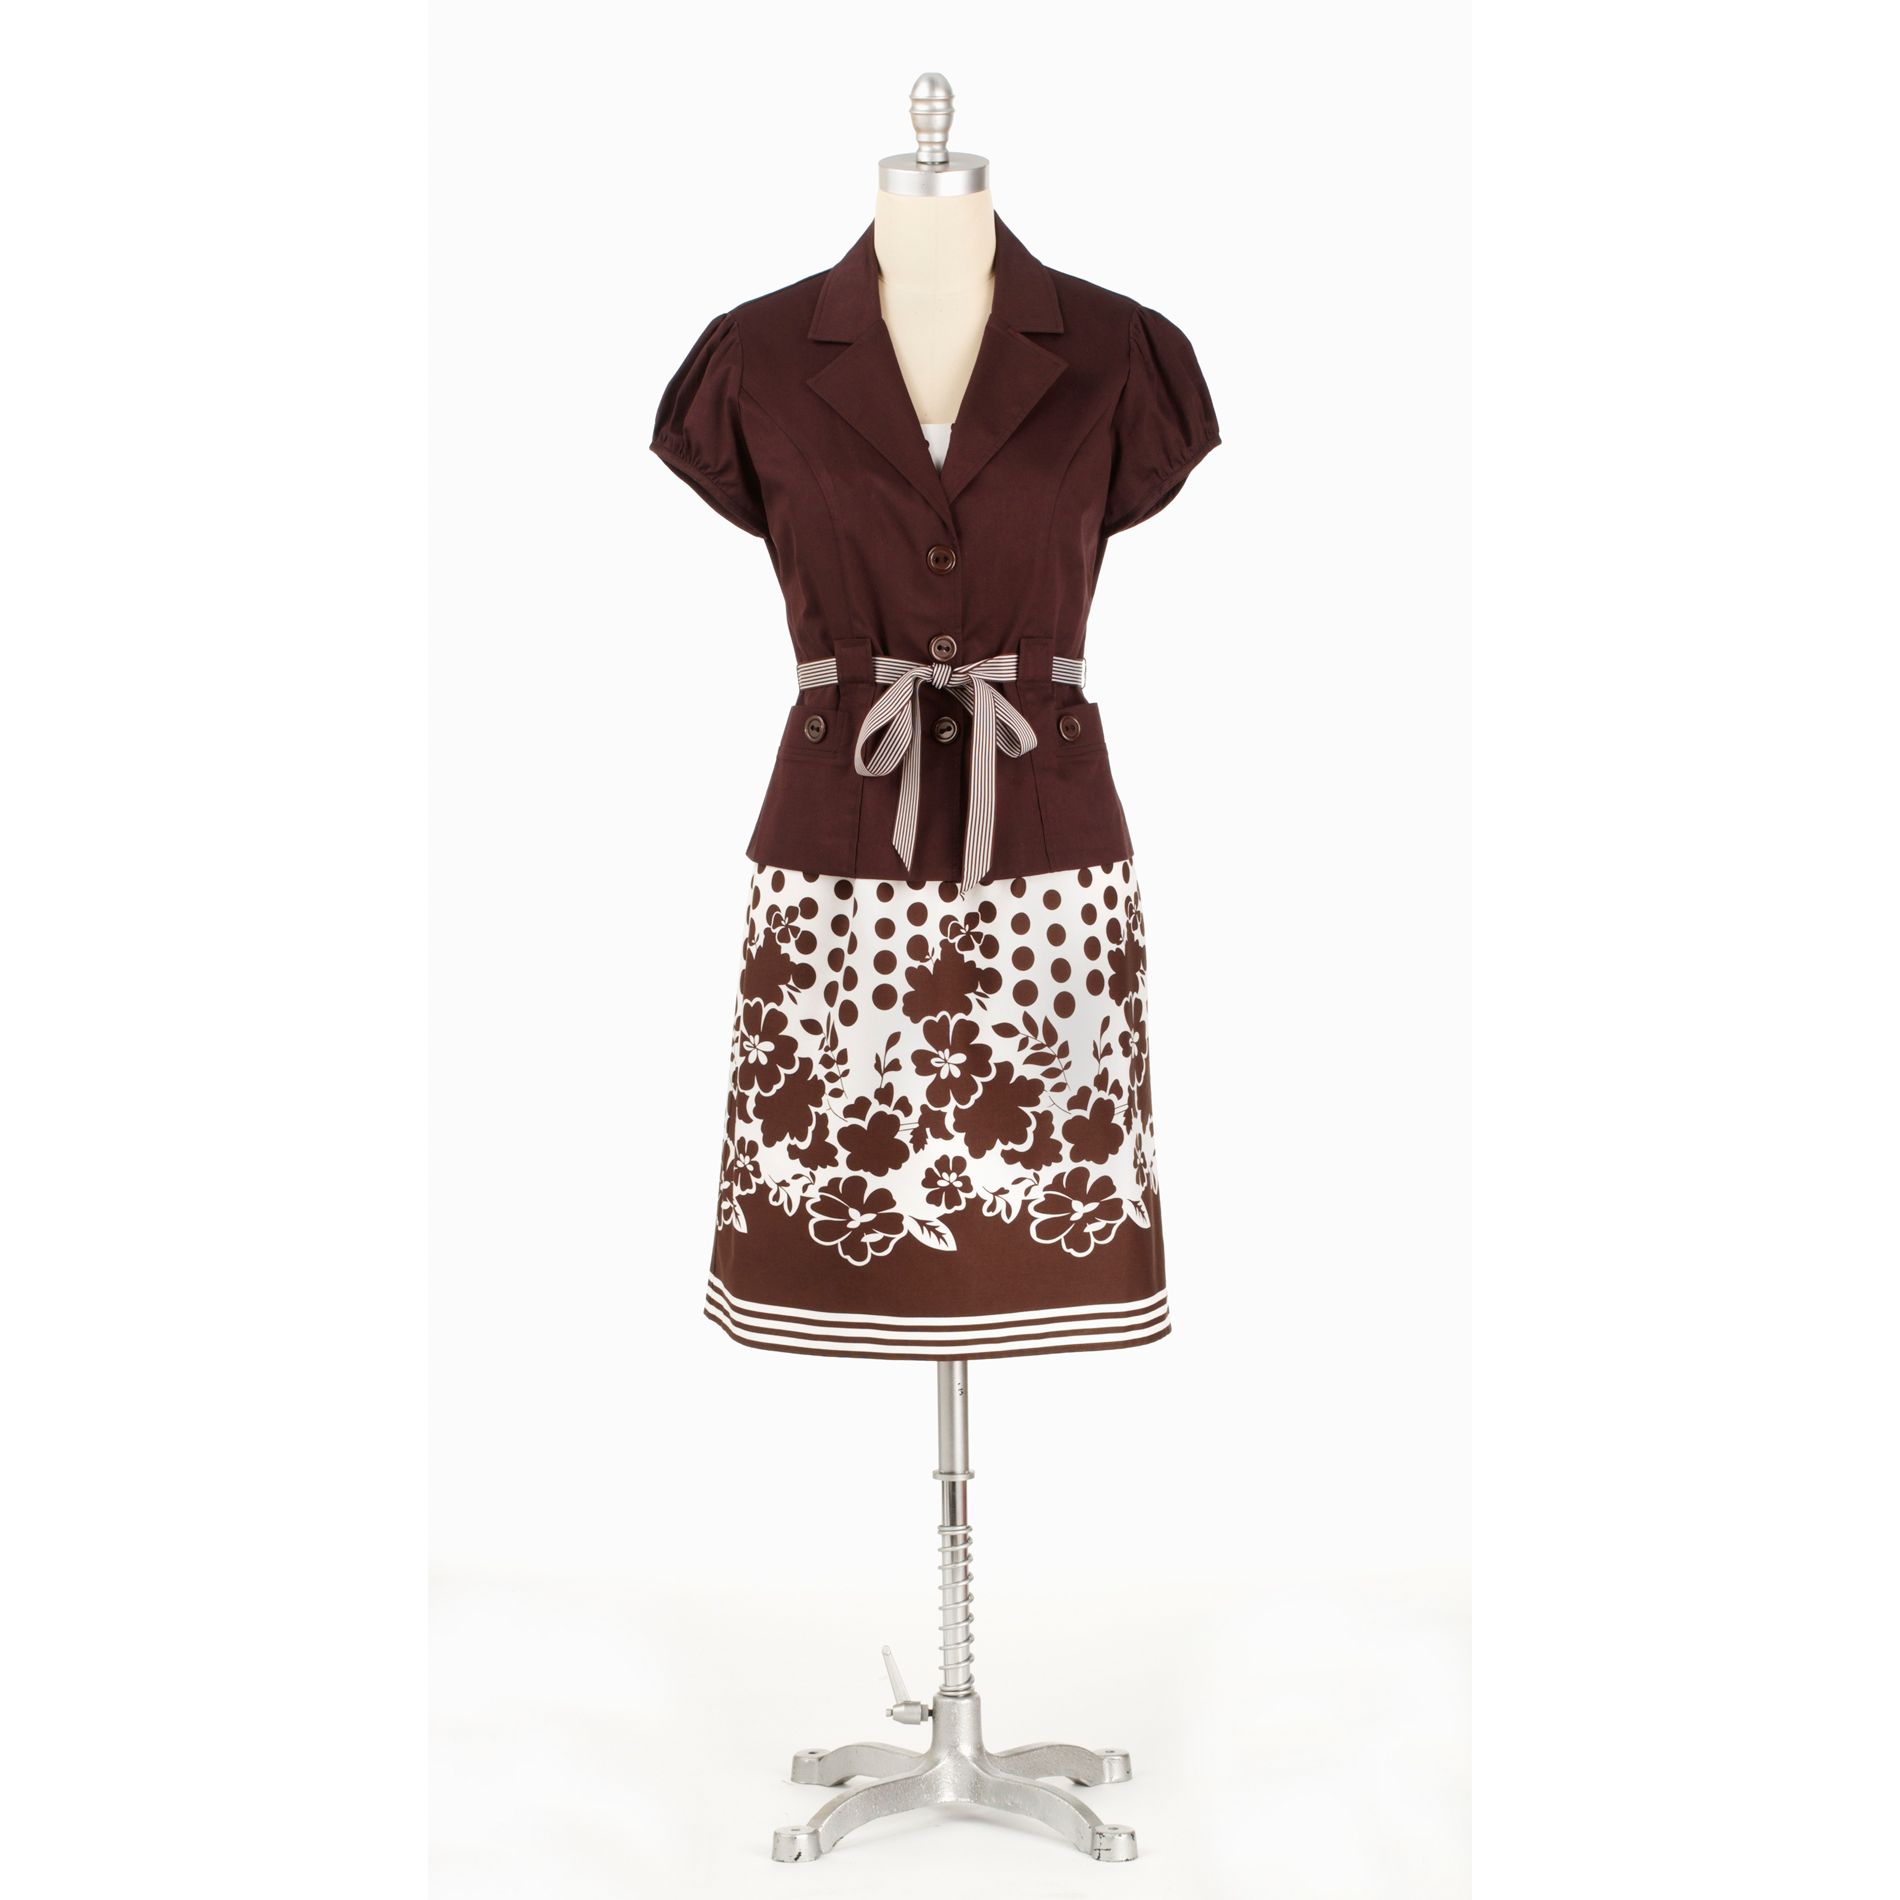 Another Thyme Brown, White Bordered Skirt Cotton Jacket